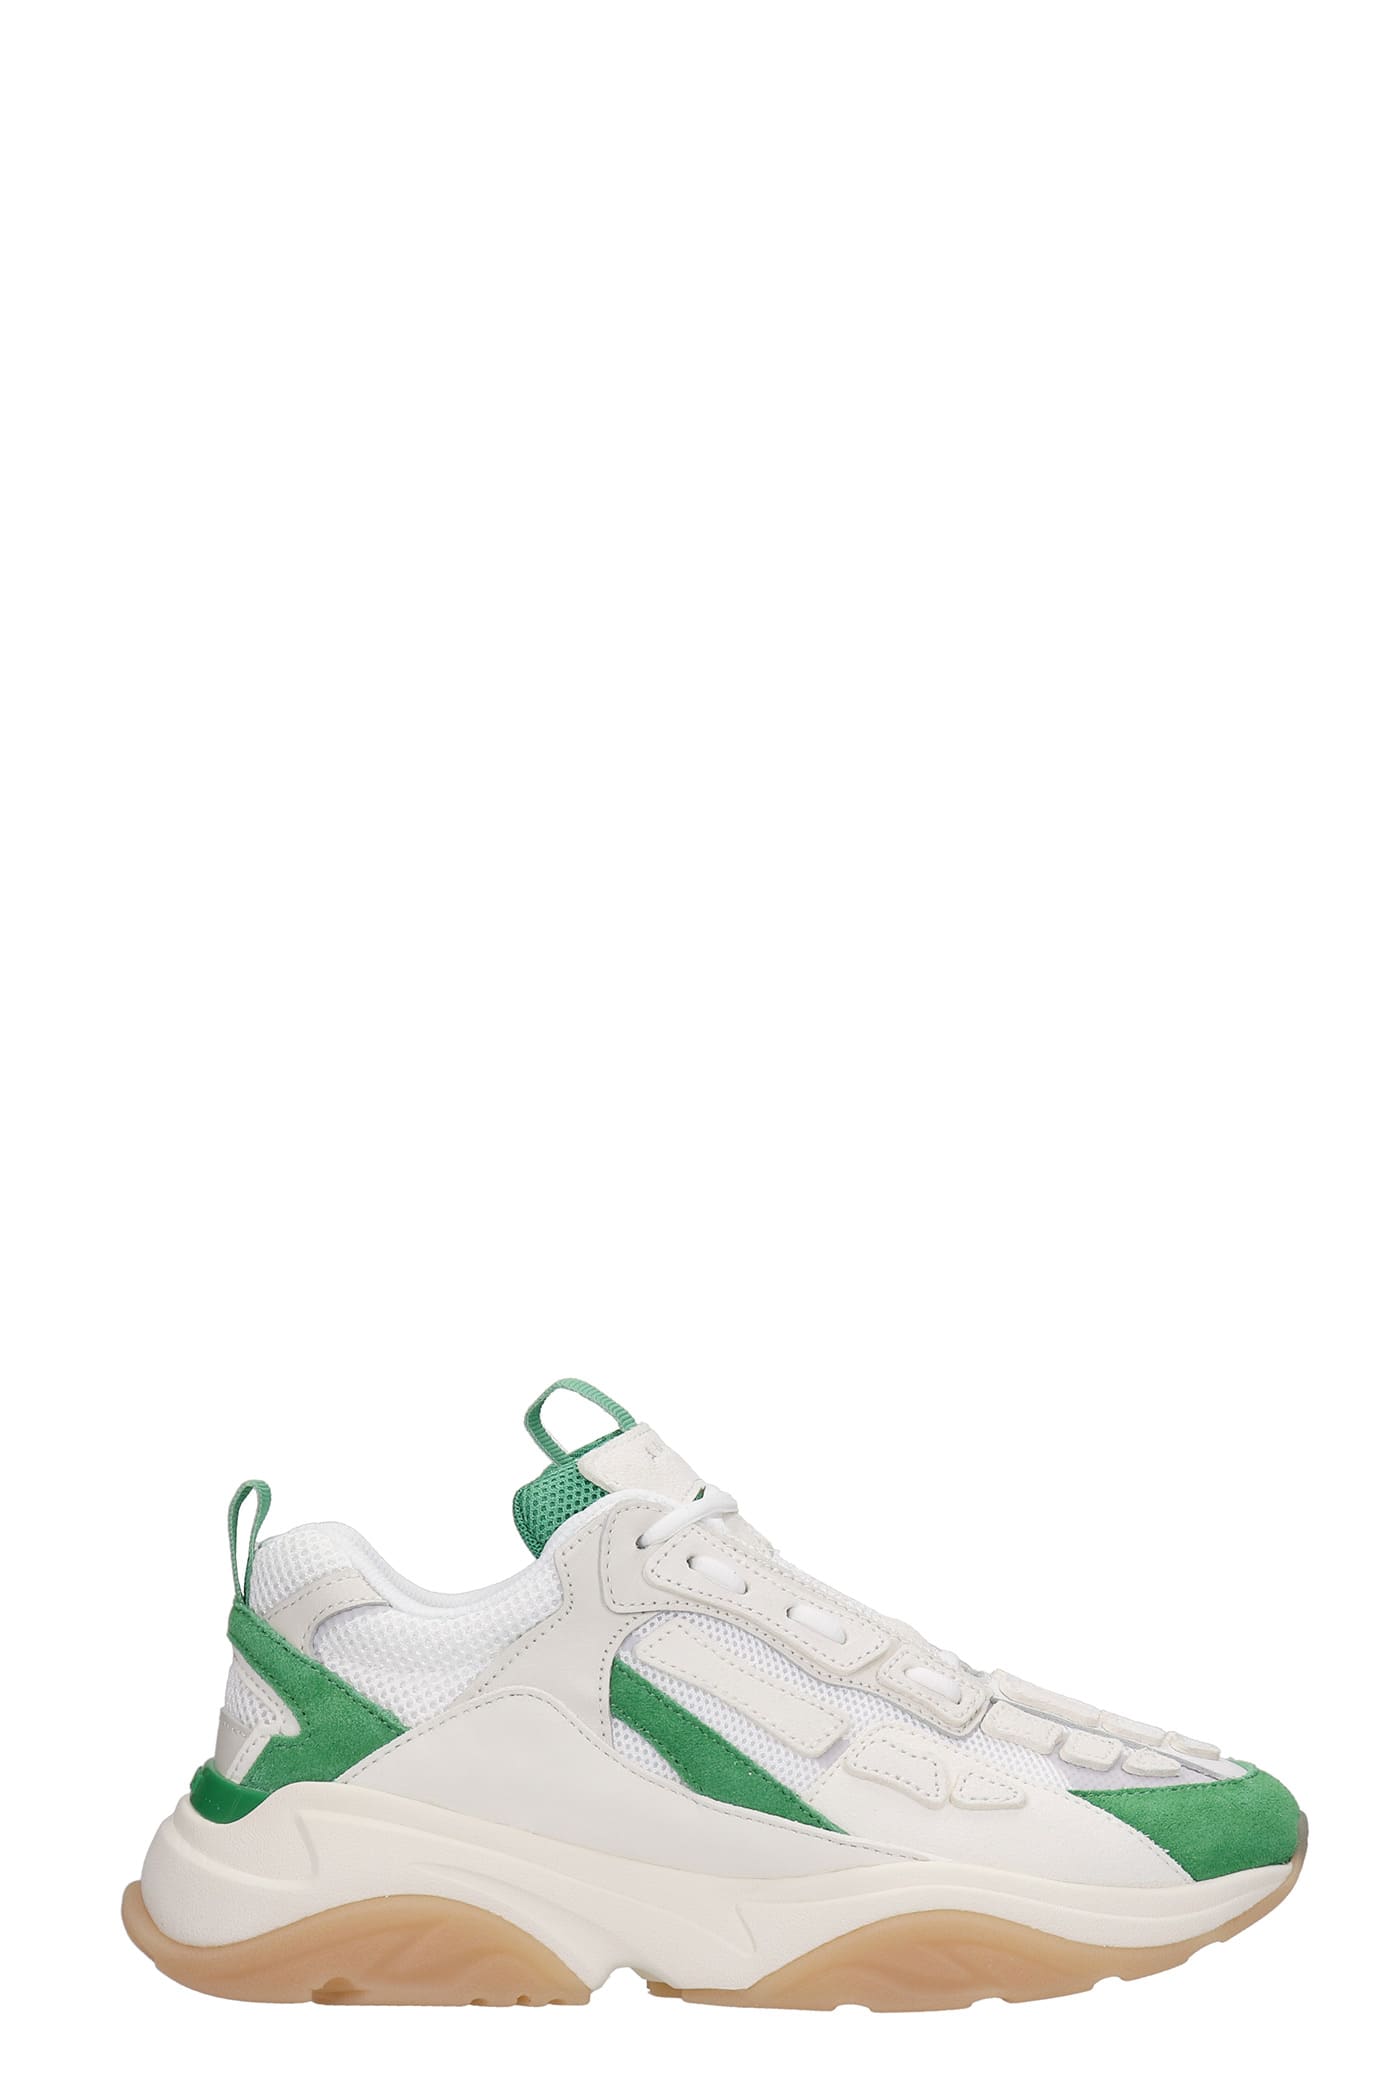 AMIRI Skel Top Sneakers In White Suede And Leather